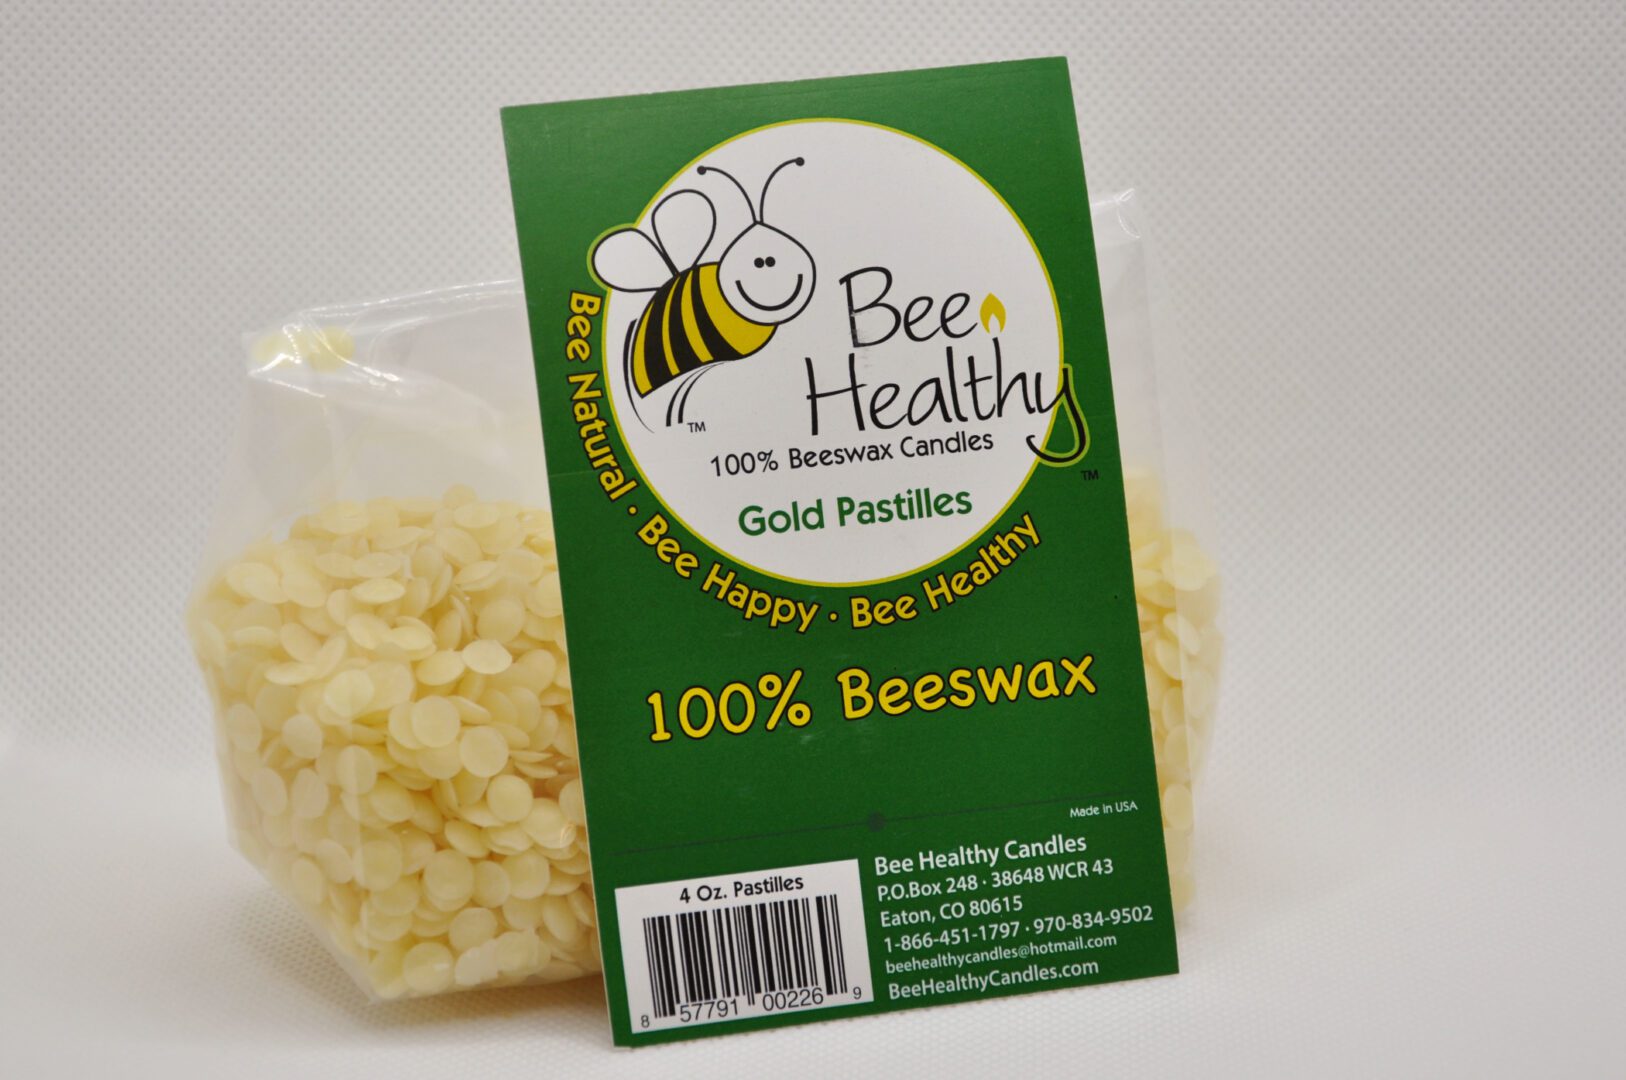 4oz Beeswax Pastilles - Bee Healthy Beeswax Candles